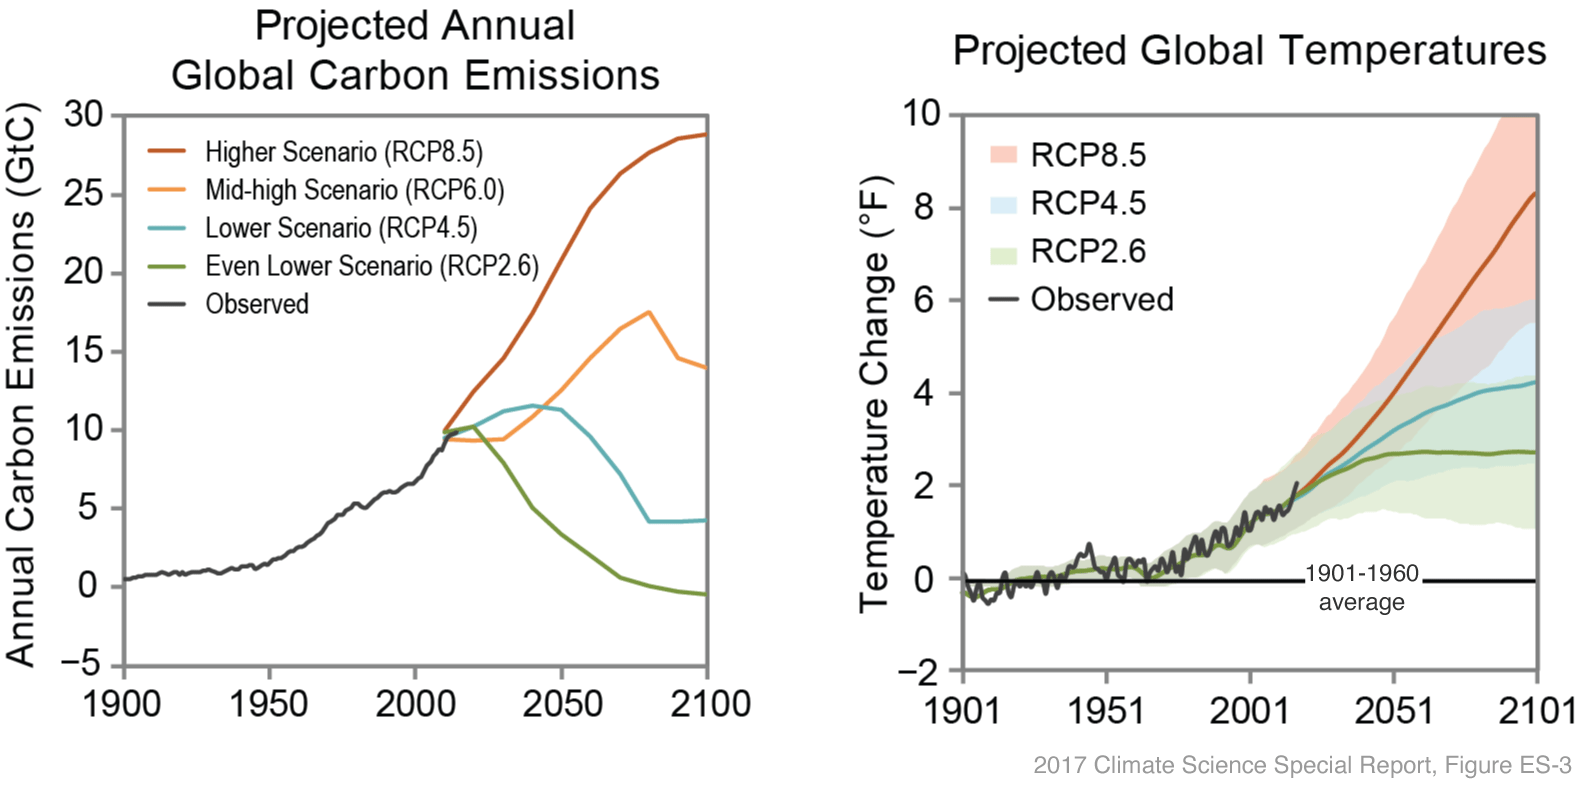 Projected carbon emissions vs projected average global temperature